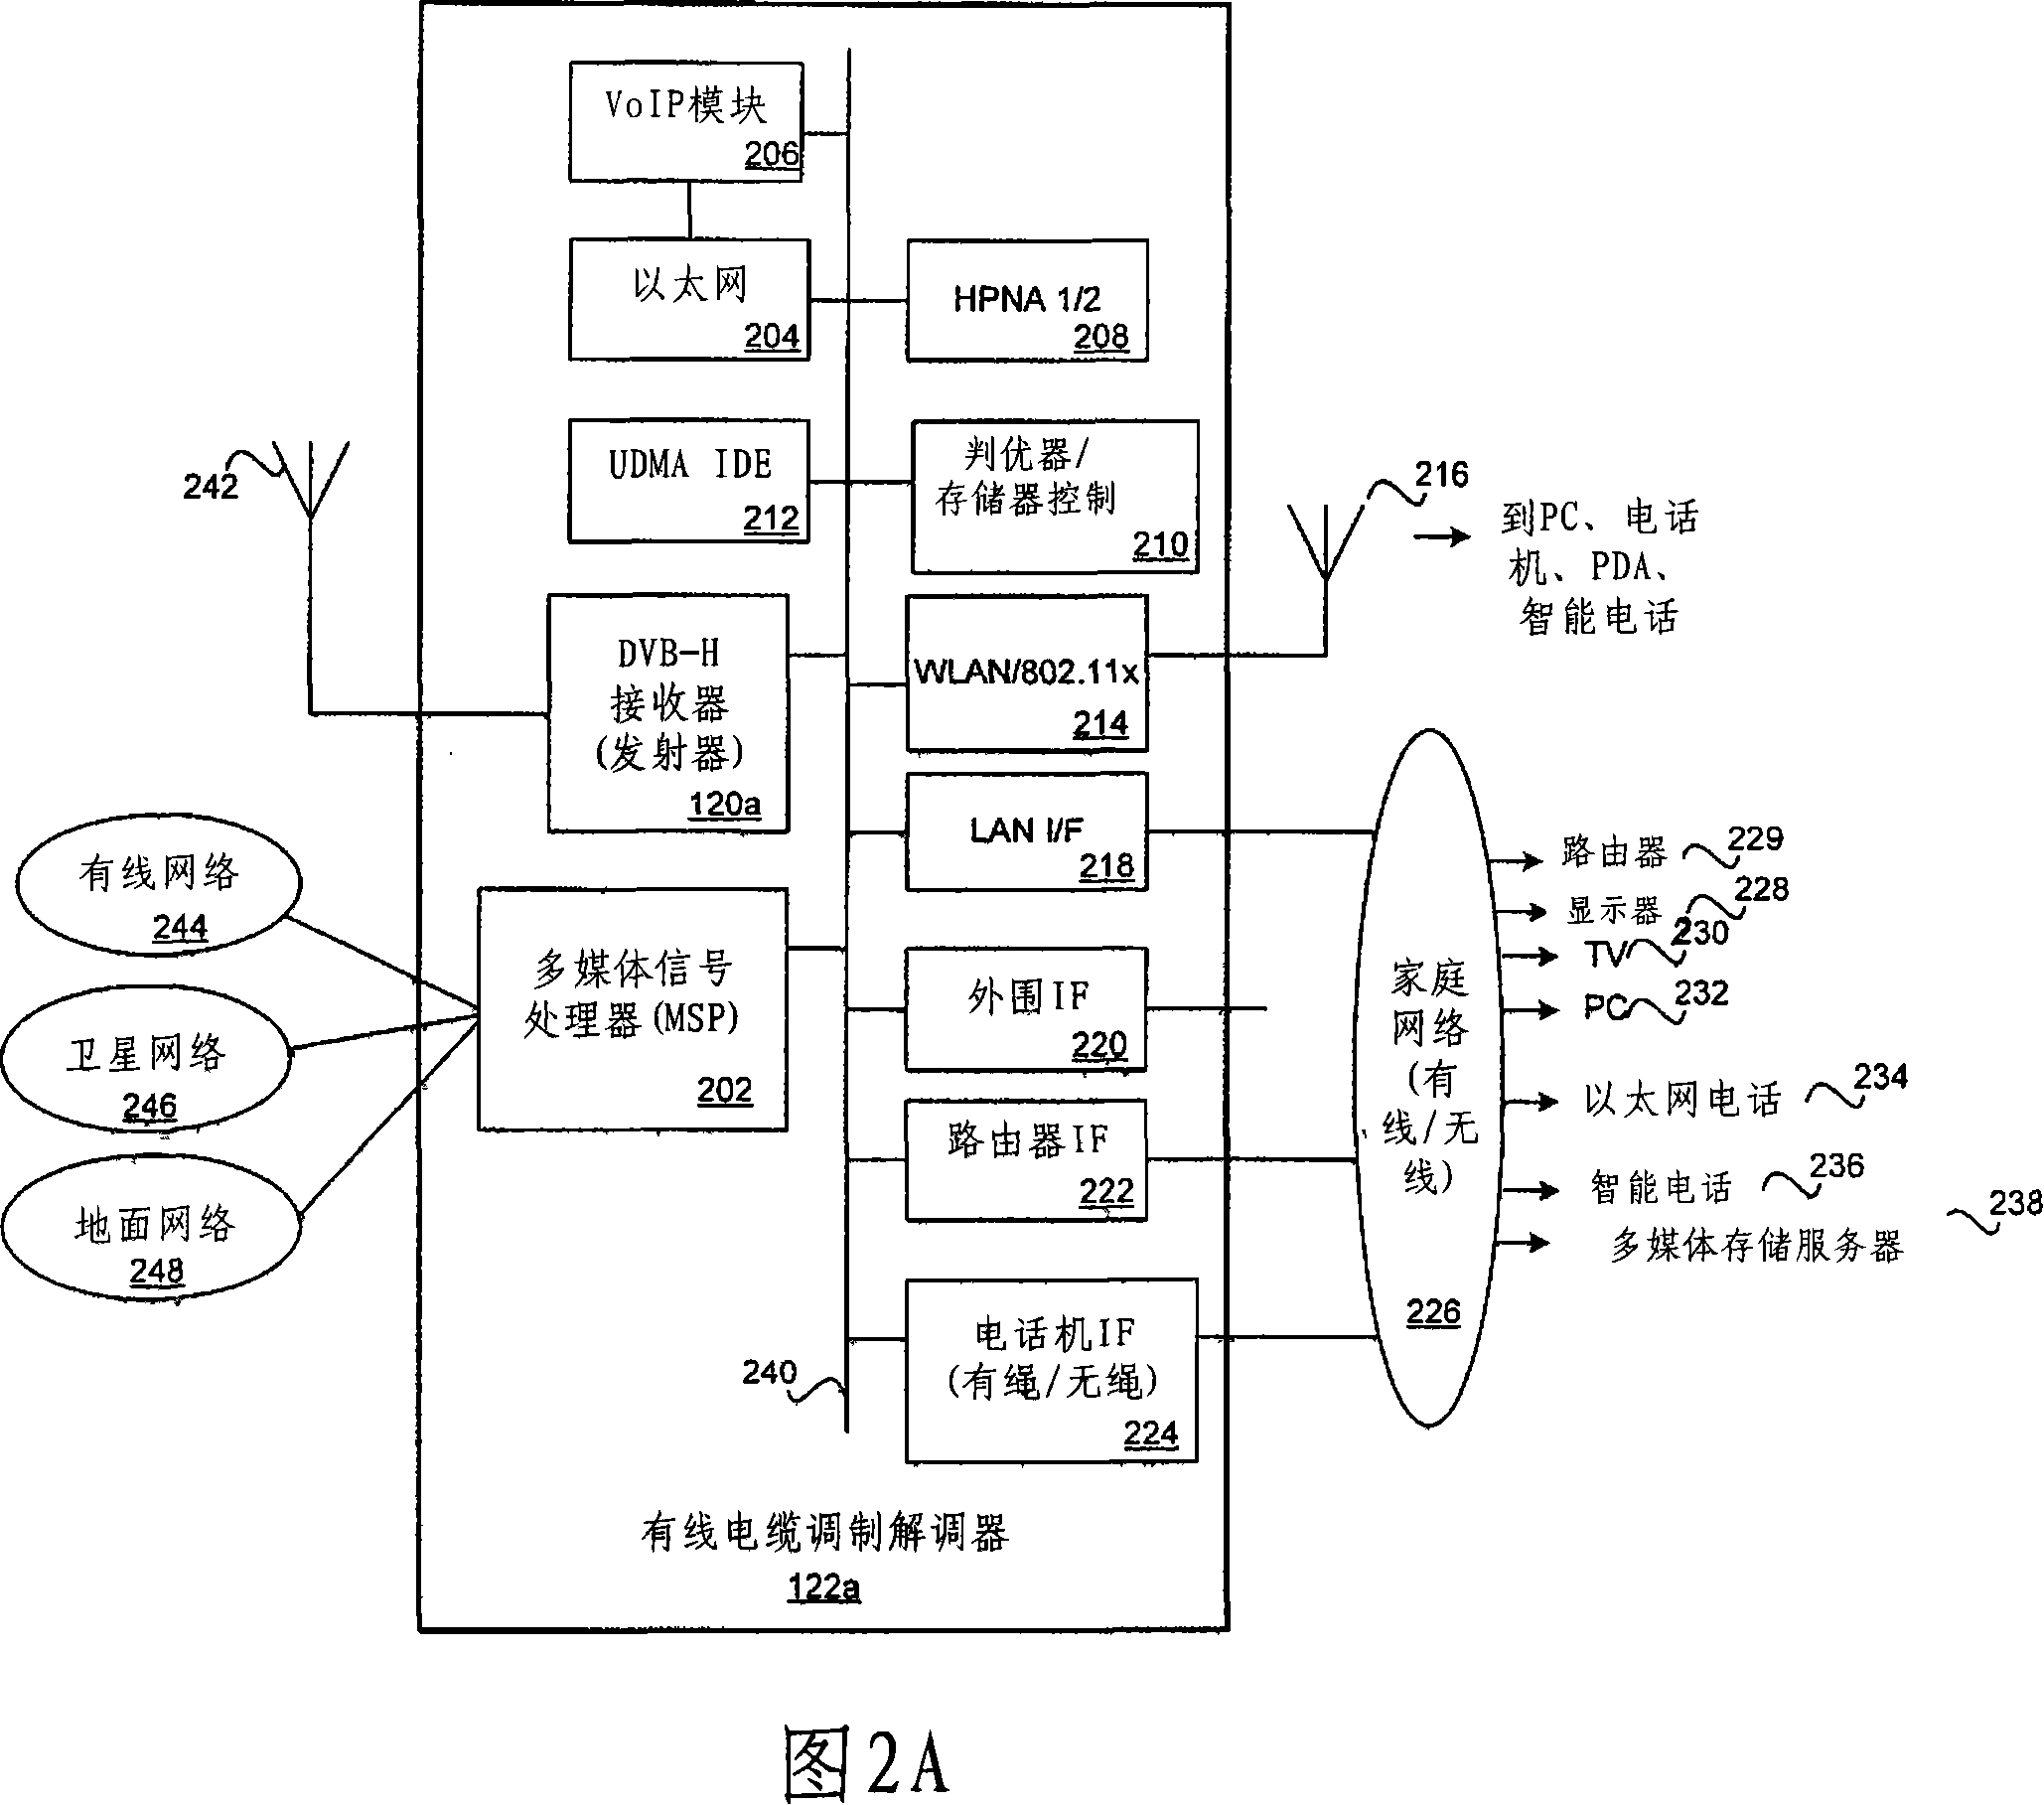 Method and system for integrated cable modem and dvb-h receiver and/or transmitter